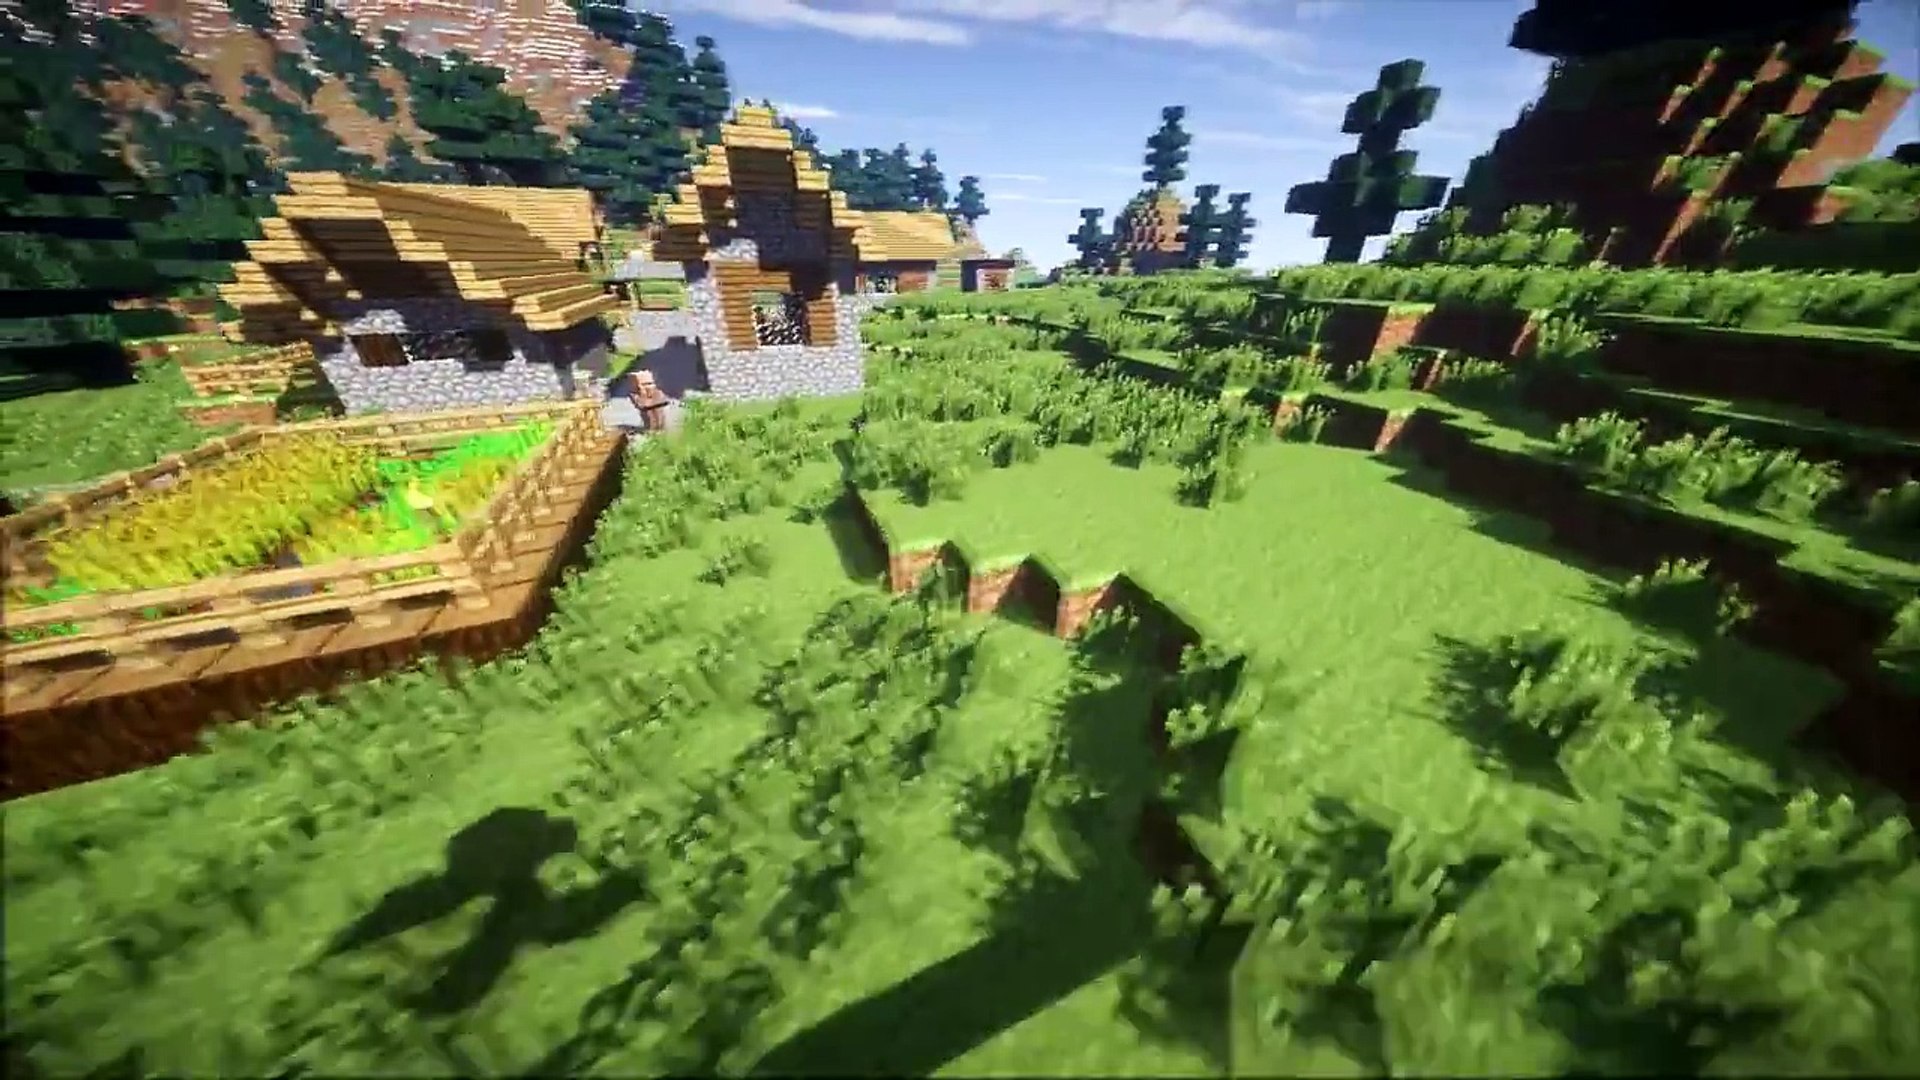 MINECRAFT SHADERS WITH GTX 960 2GB AND INTEL CORE i5 - video Dailymotion